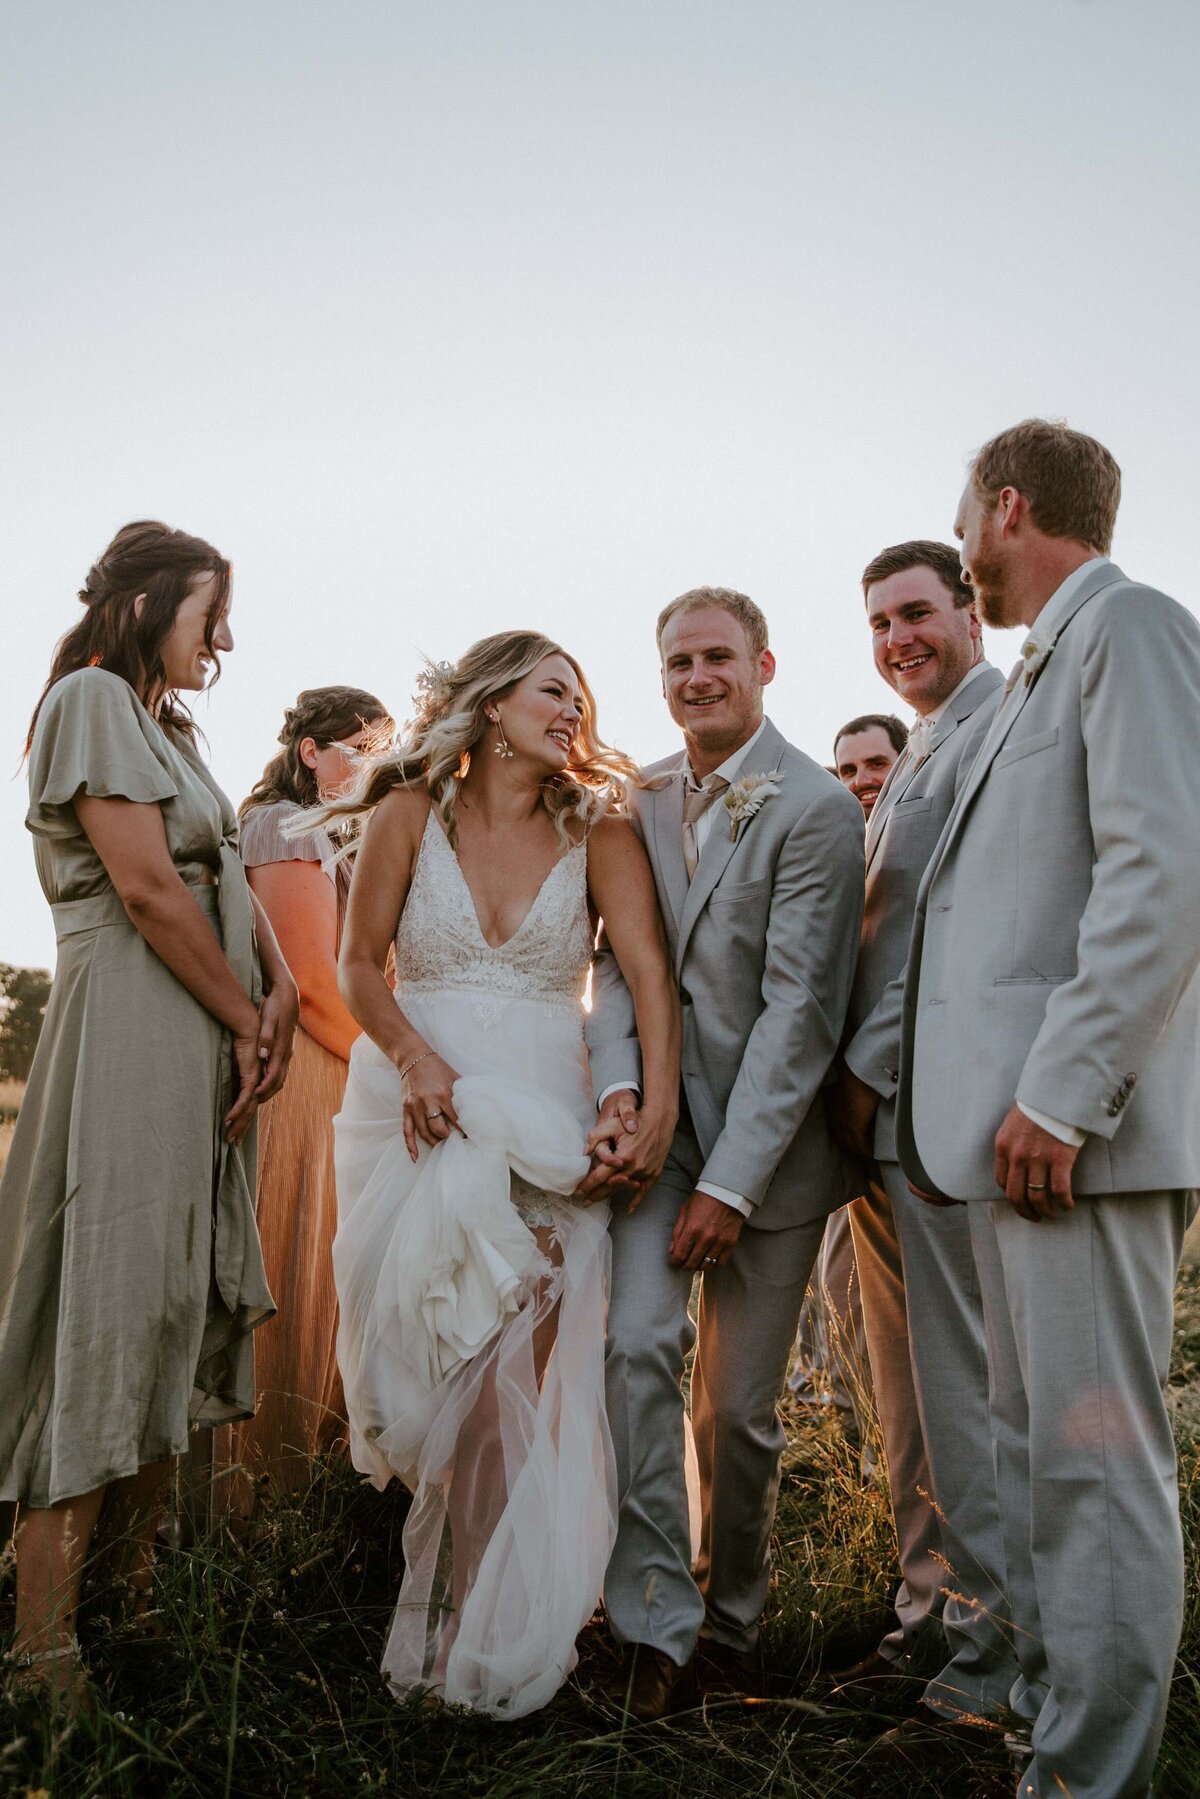 Bridesmaids and groomsmen form an aisle. Bride and groom walk between them smiling at each other at golden hour rustic barn wedding in Exeter, Ontario.